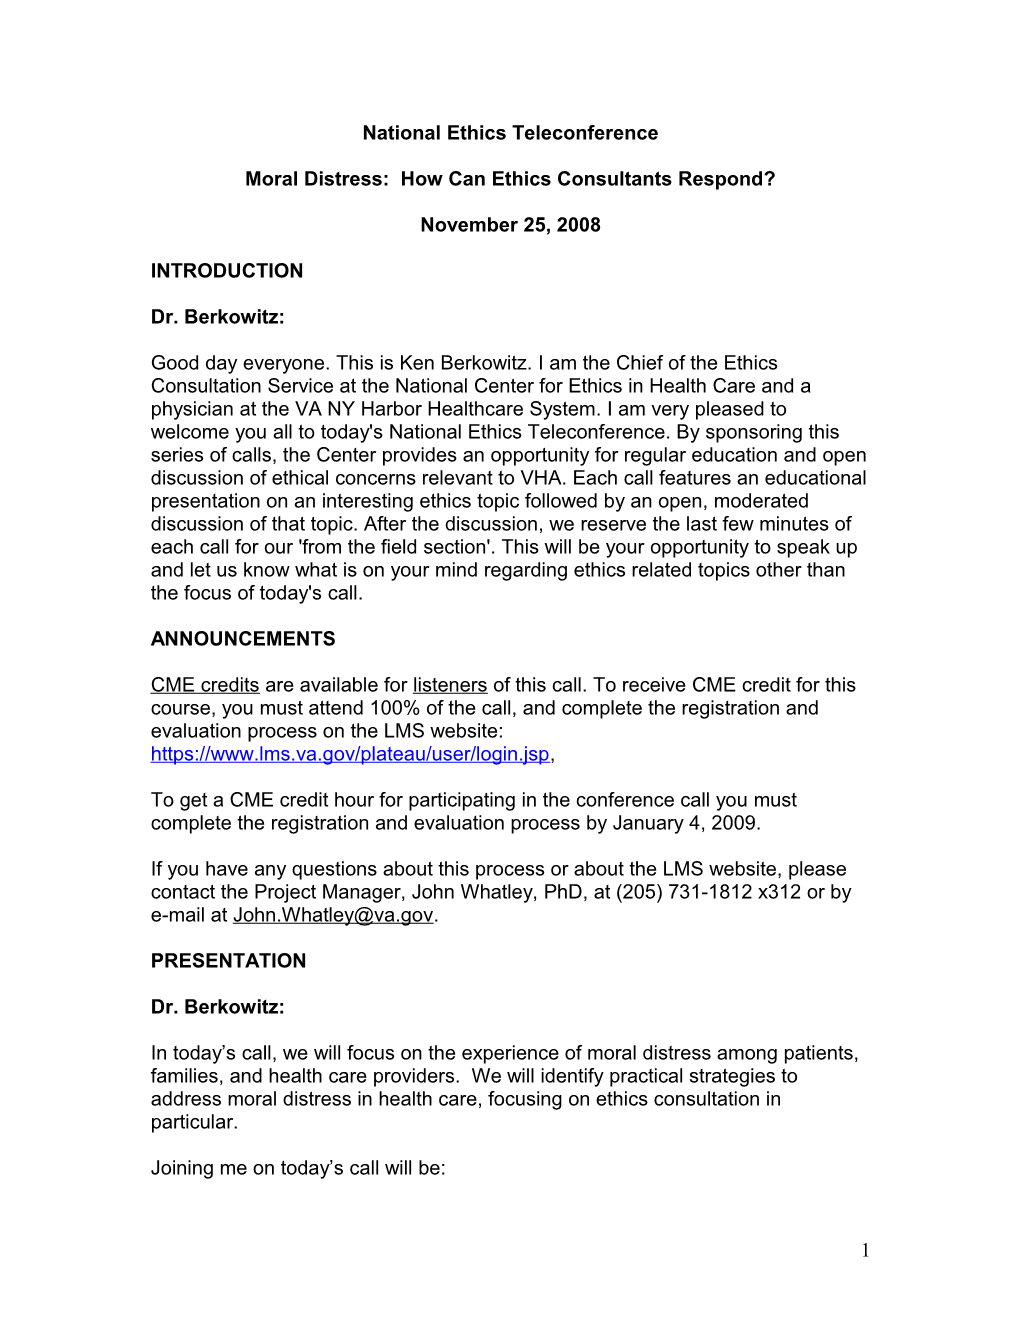 National Ethics Teleconference - Moral Distress: How Can Ethics Consultants Respond - US